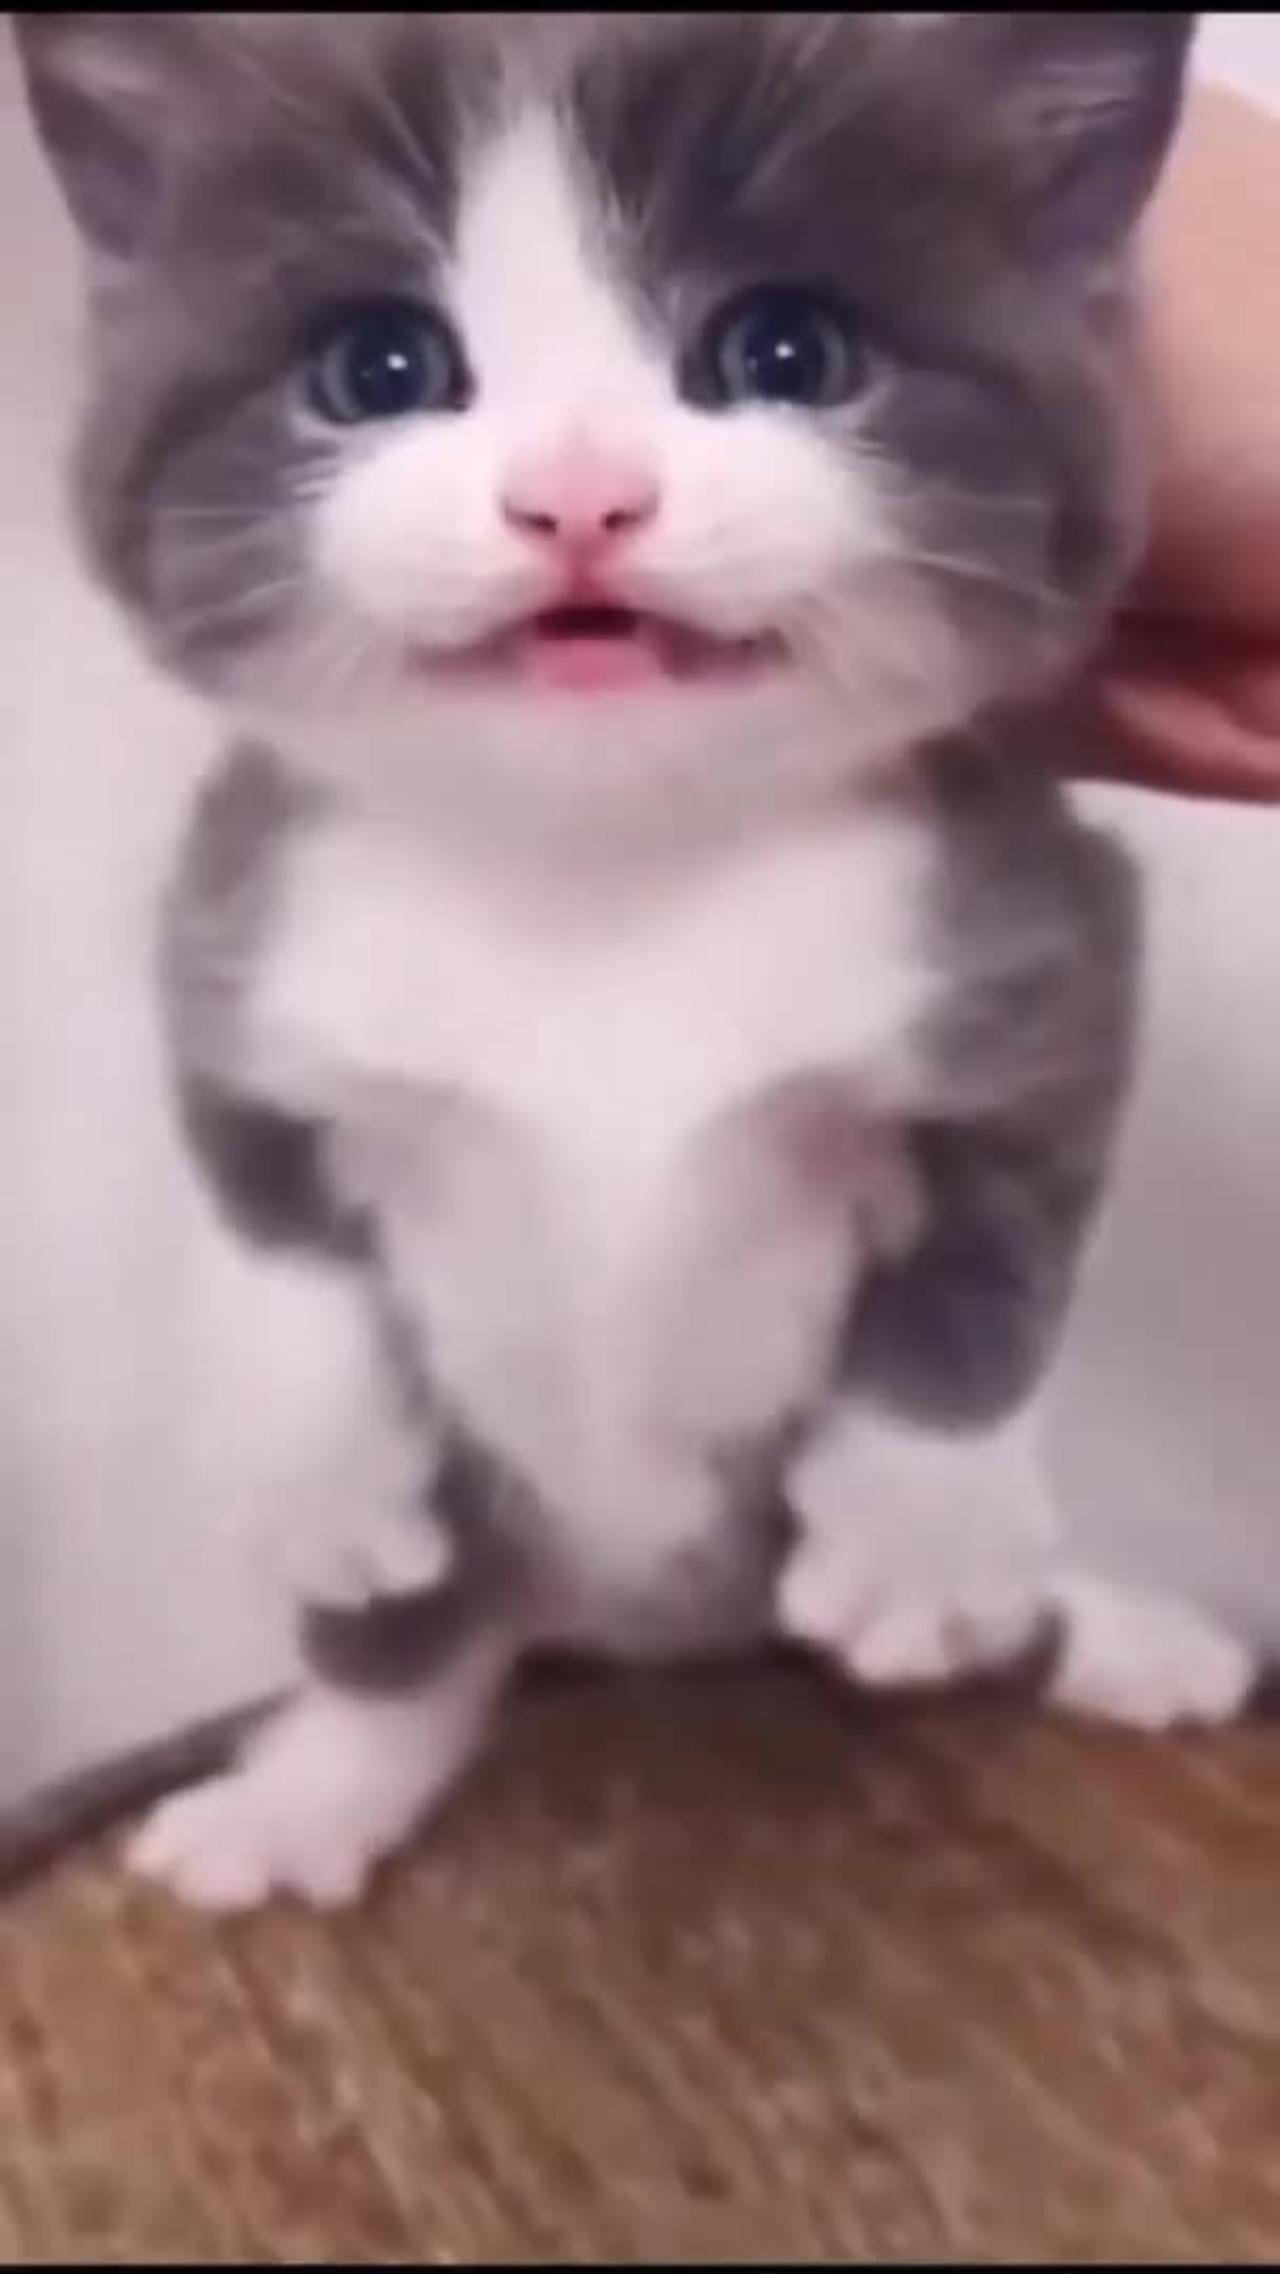 It's a very crazy cat with funny moment